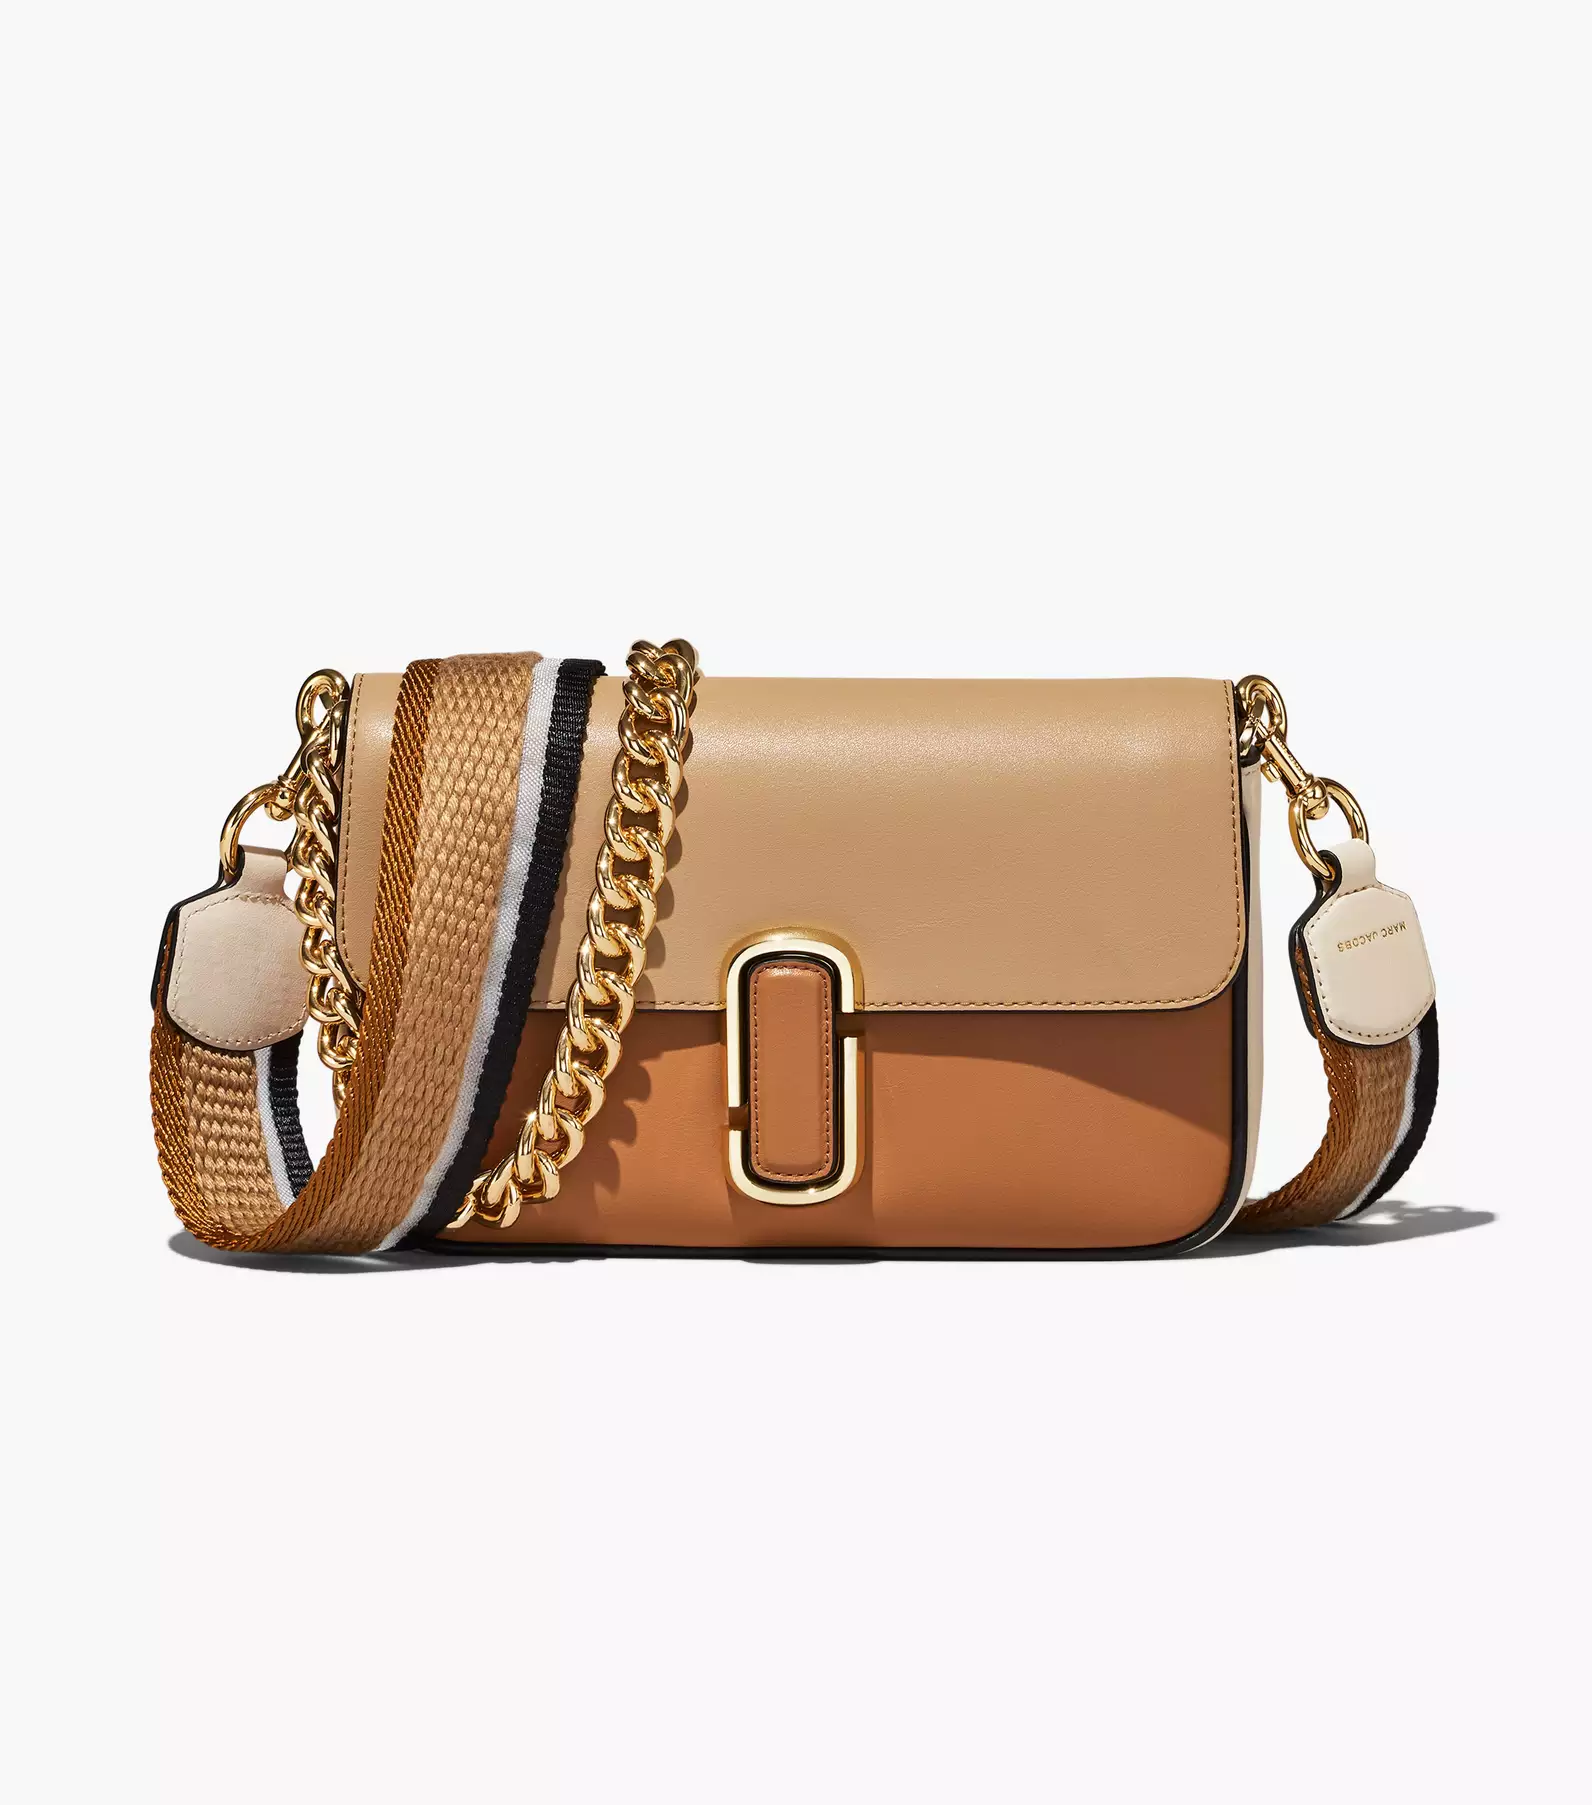 MARC BY MARC JACOBS バッグ - ハンドバッグ